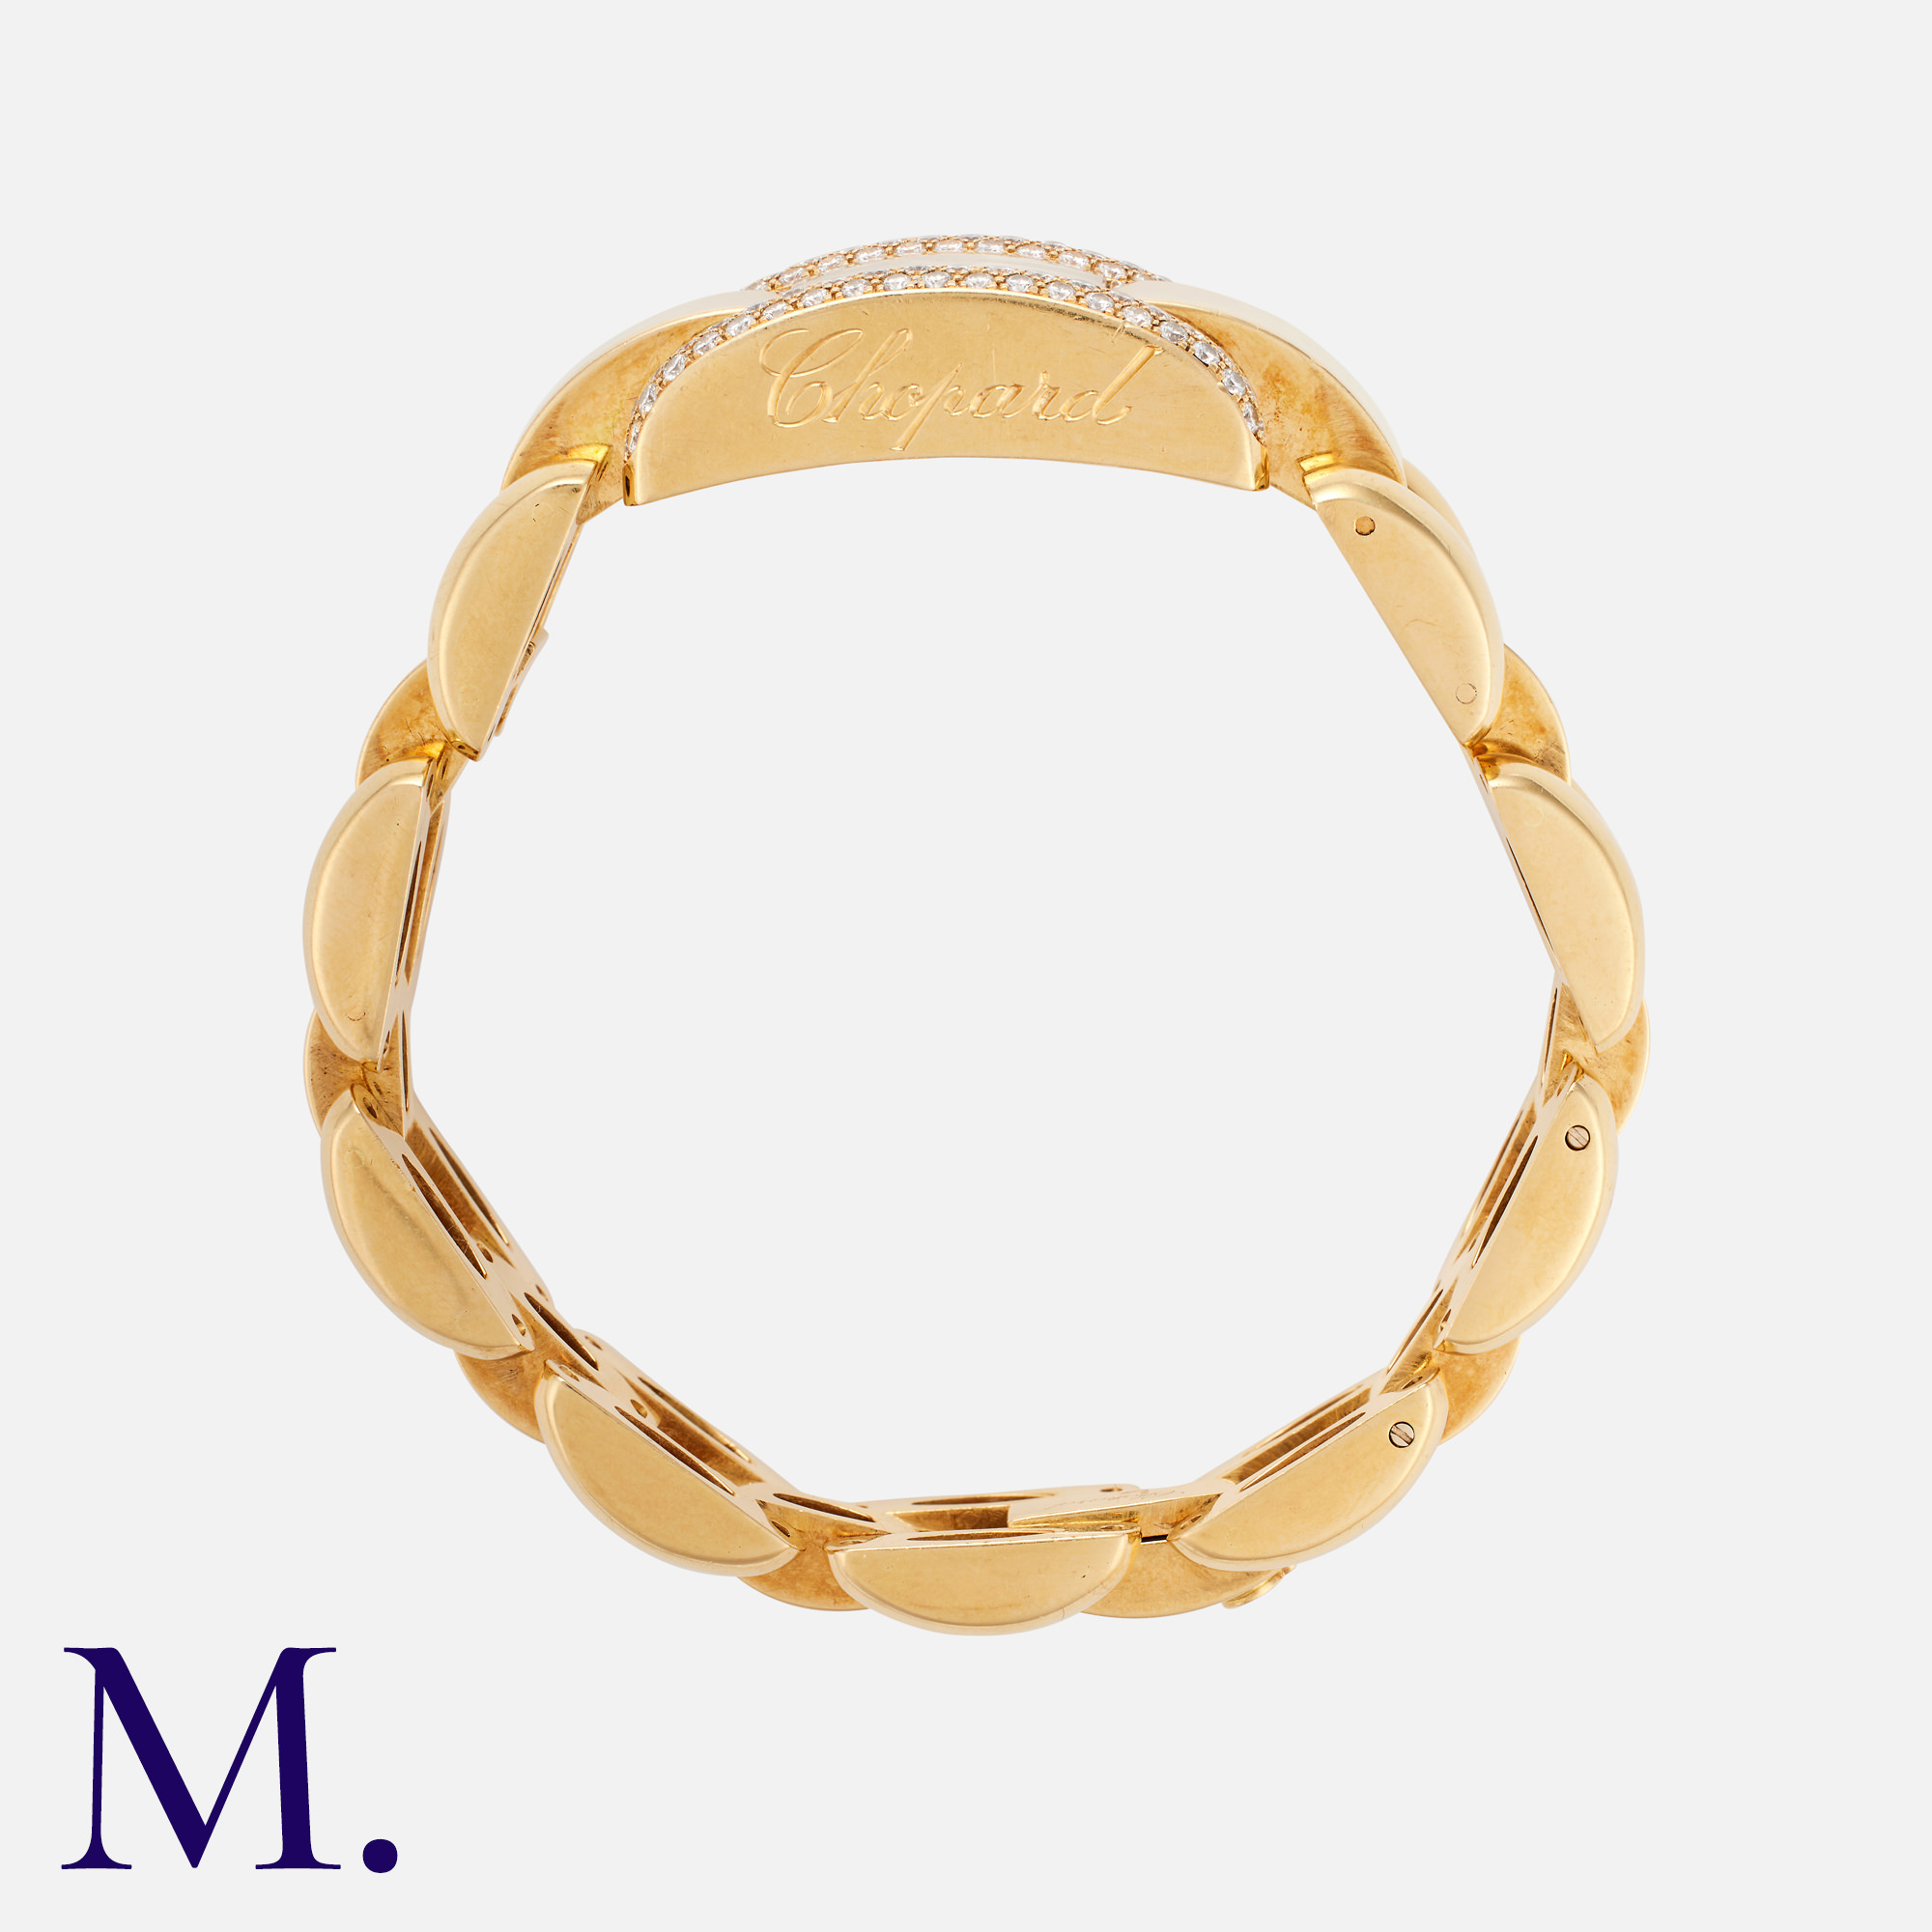 CHOPARD. A Ladies Diamond bracelet watch in 18ct yellow gold, the rectangular white dial with - Image 2 of 2